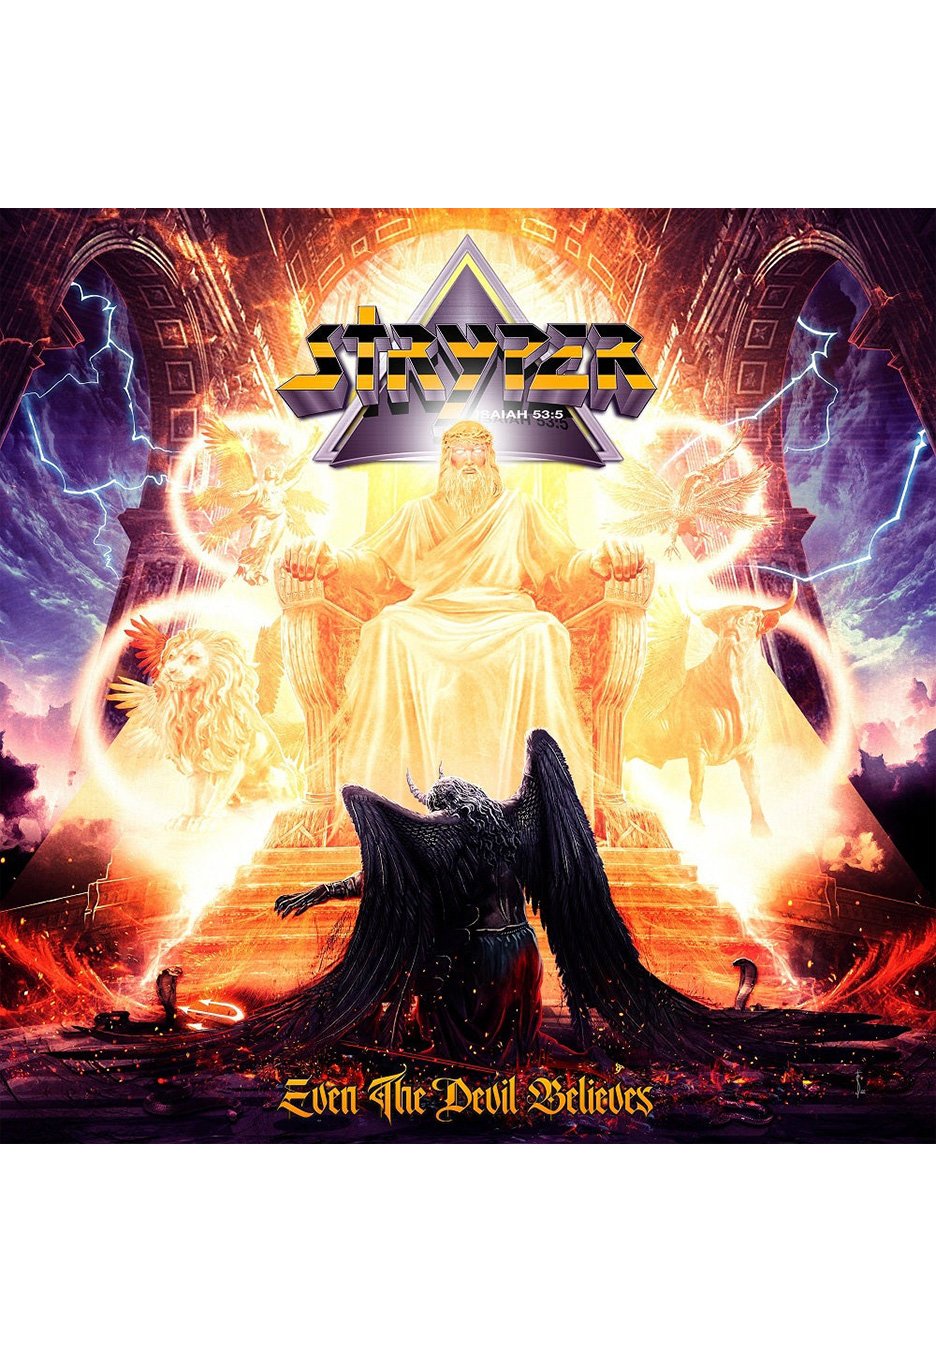 Stryper - Even The Devil Clear Blue - Colored Vinyl